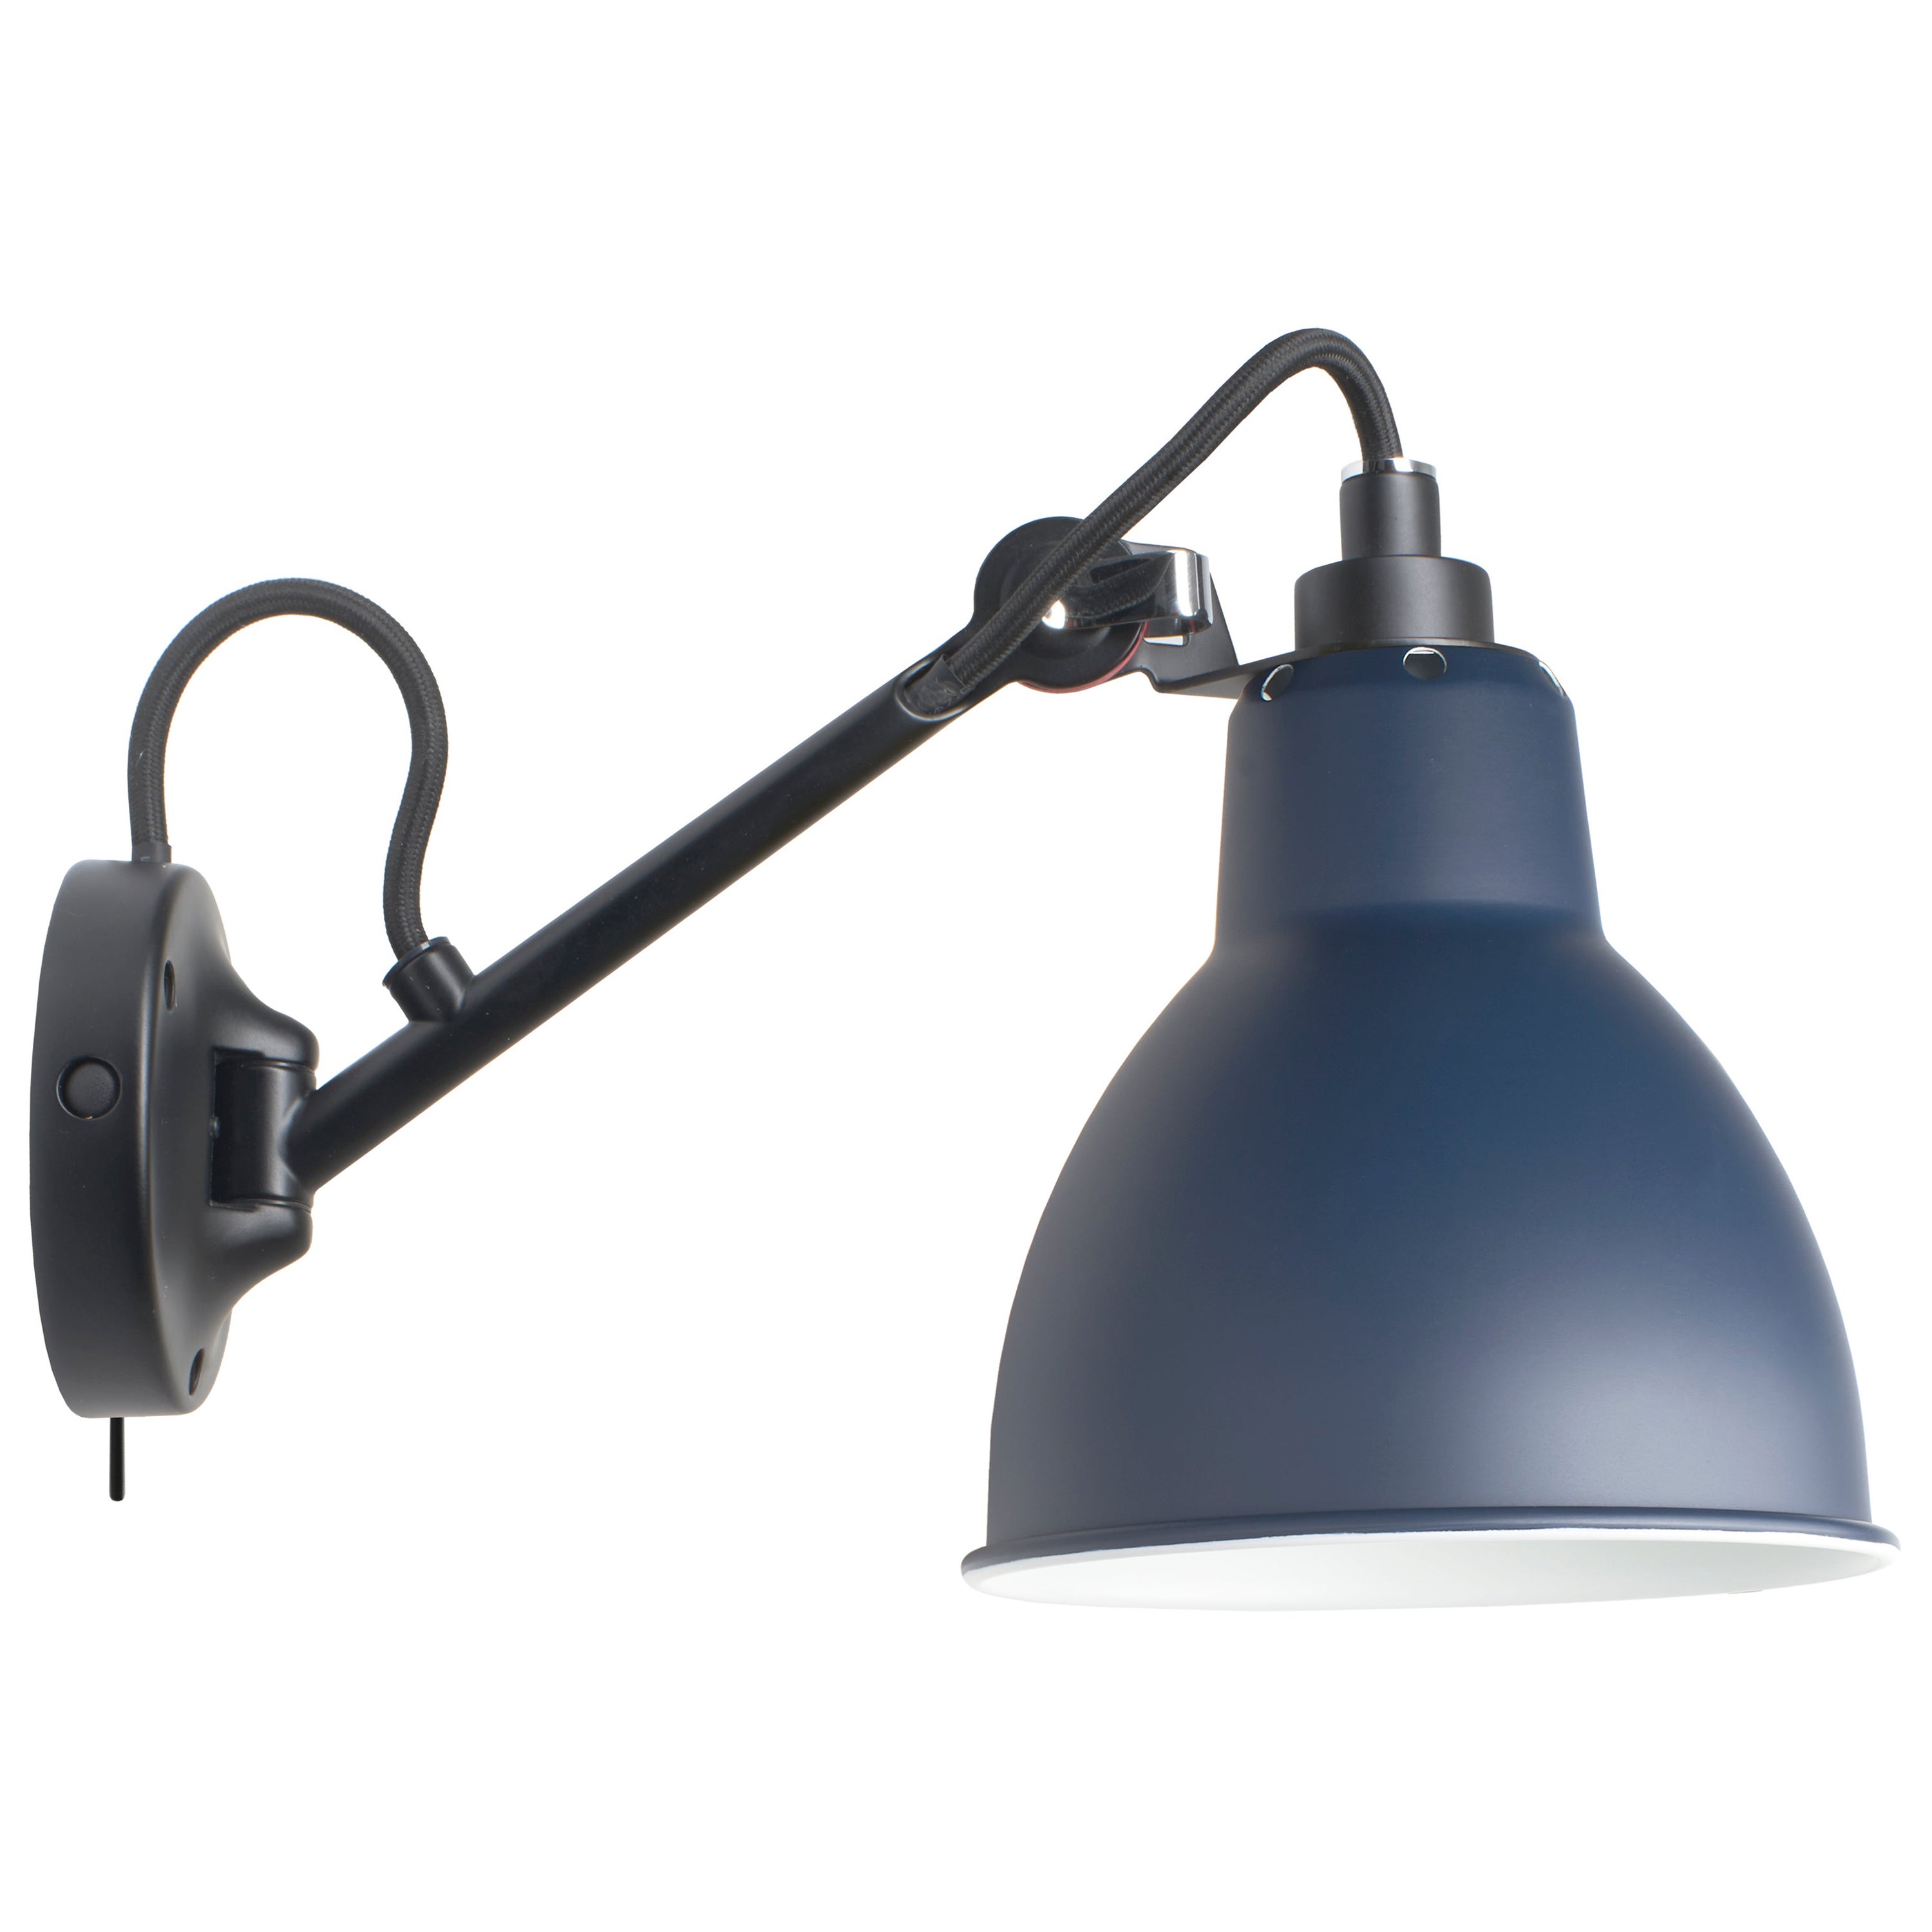 DCW Editions La Lampe Gras N°104 SW Wall Lamp in Black Arm and Blue Shade